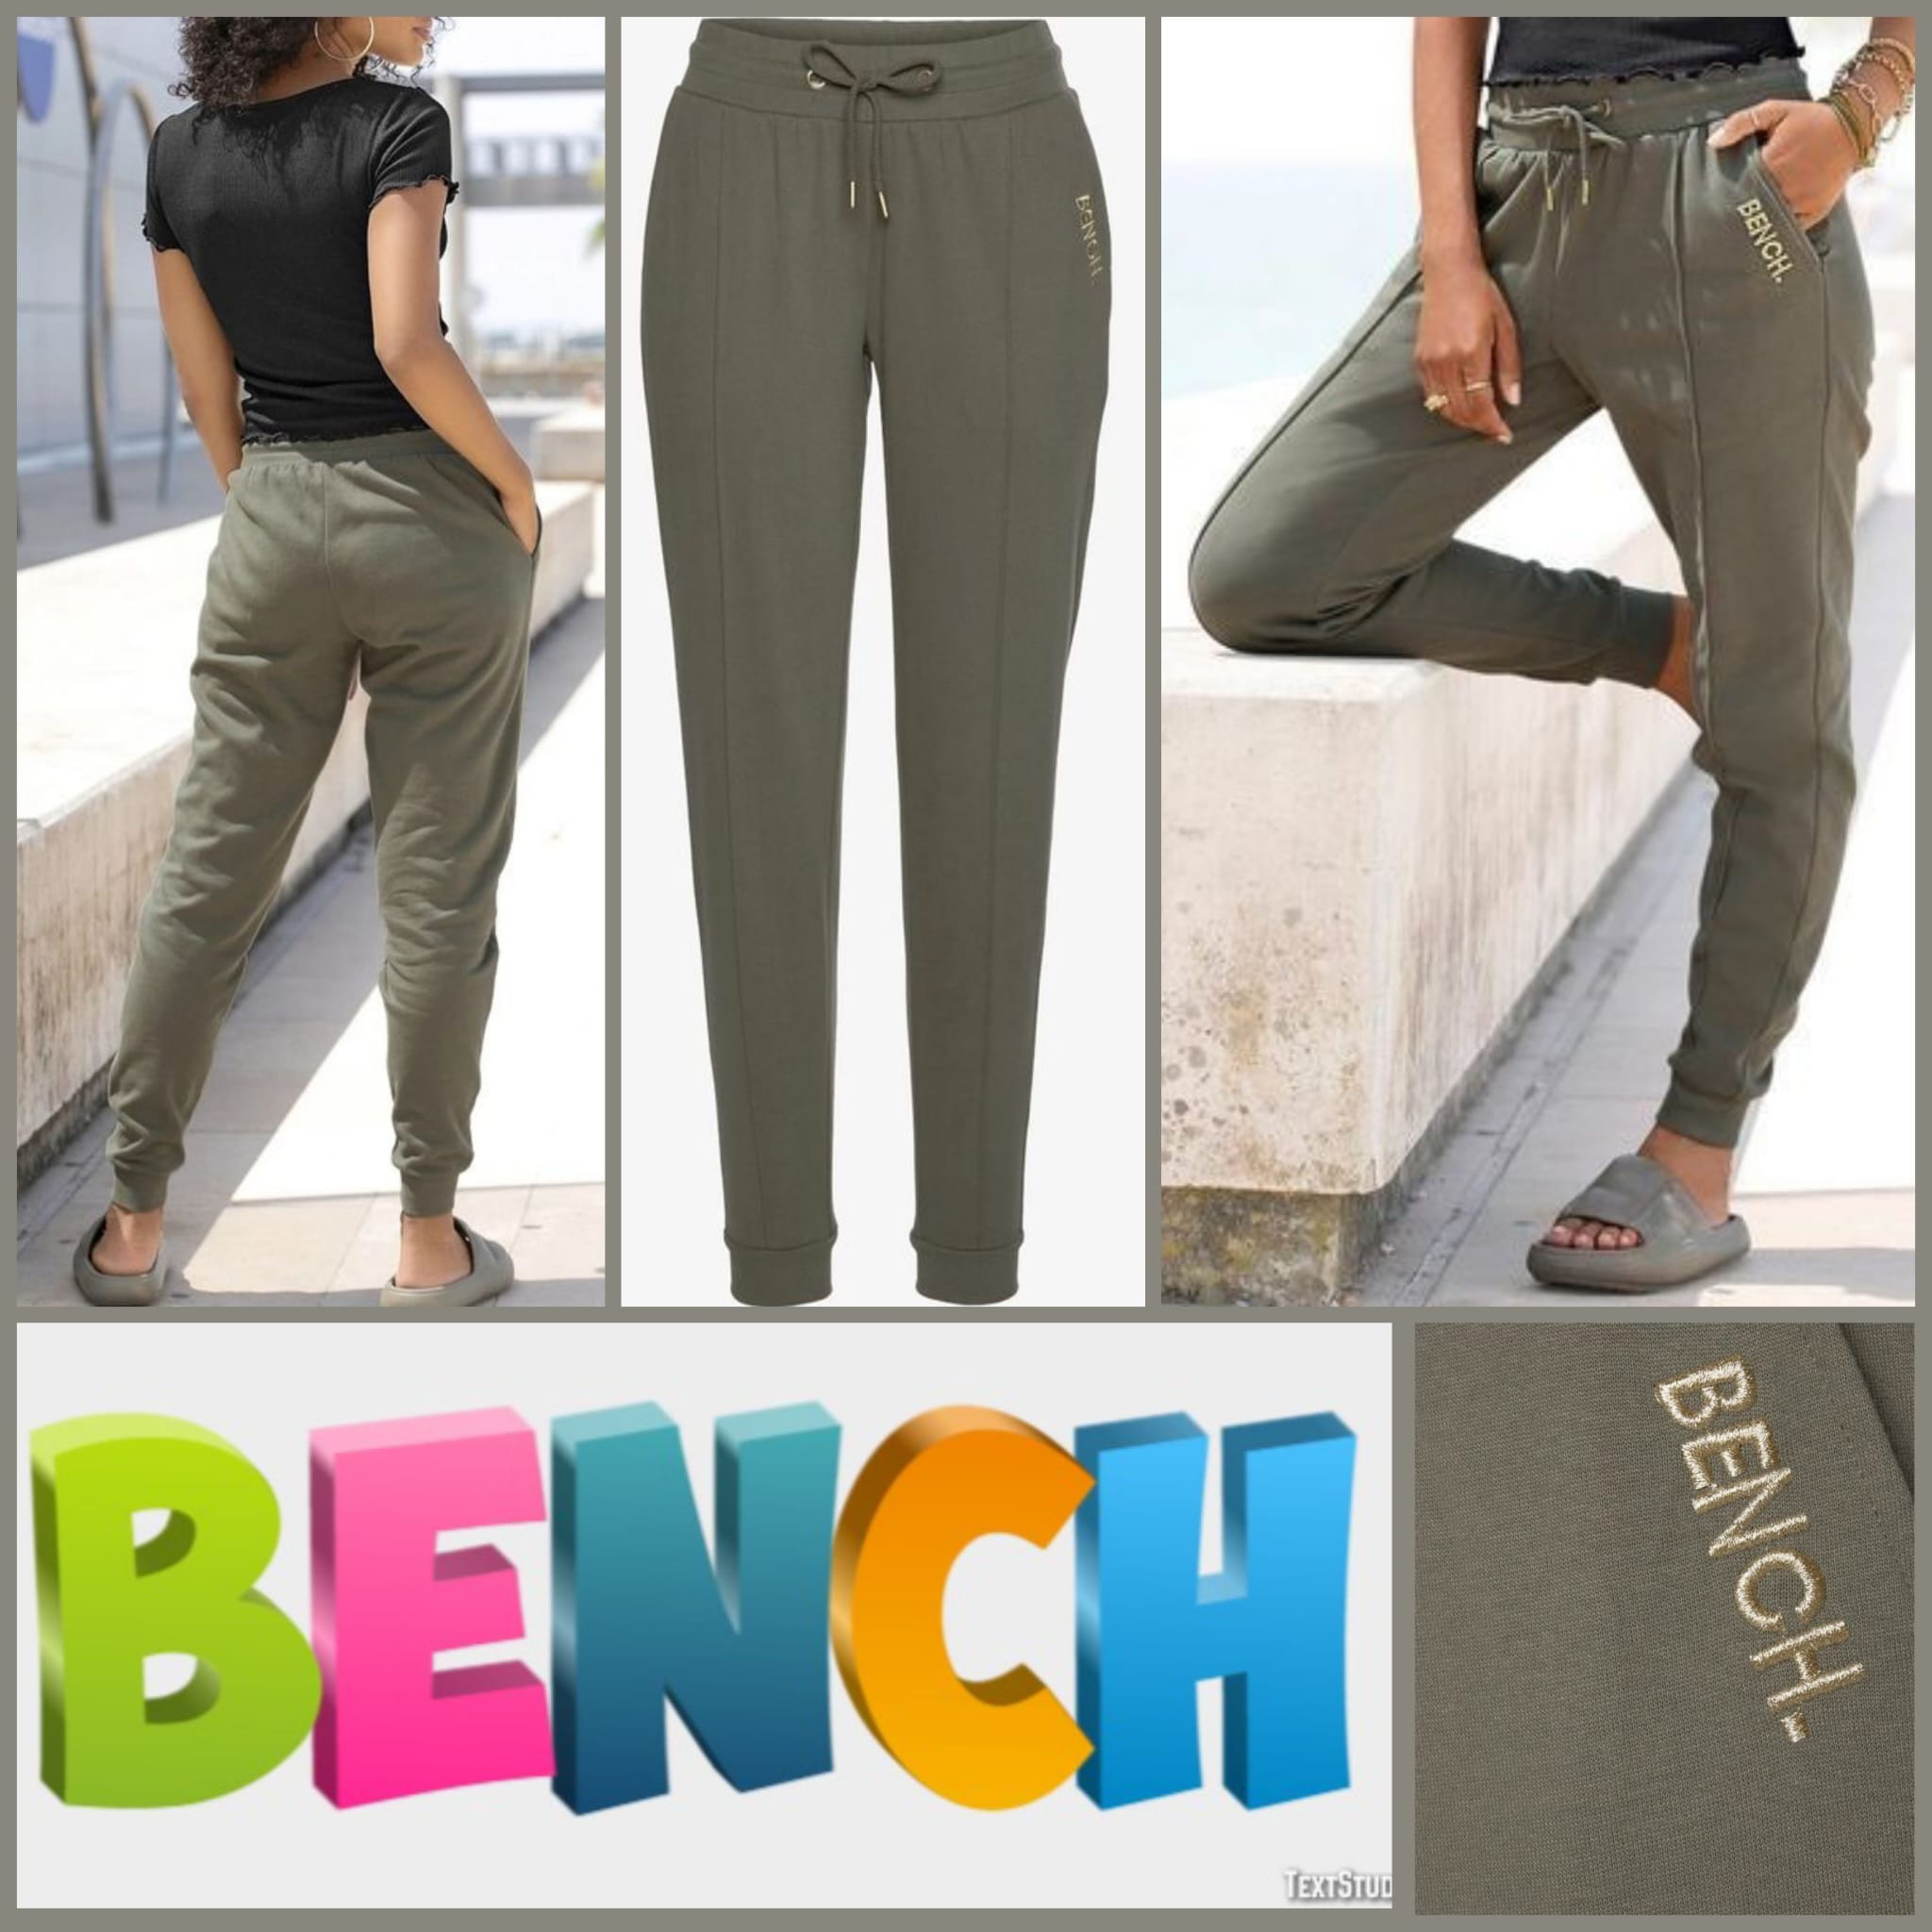 Women's sports trousers from Bench 